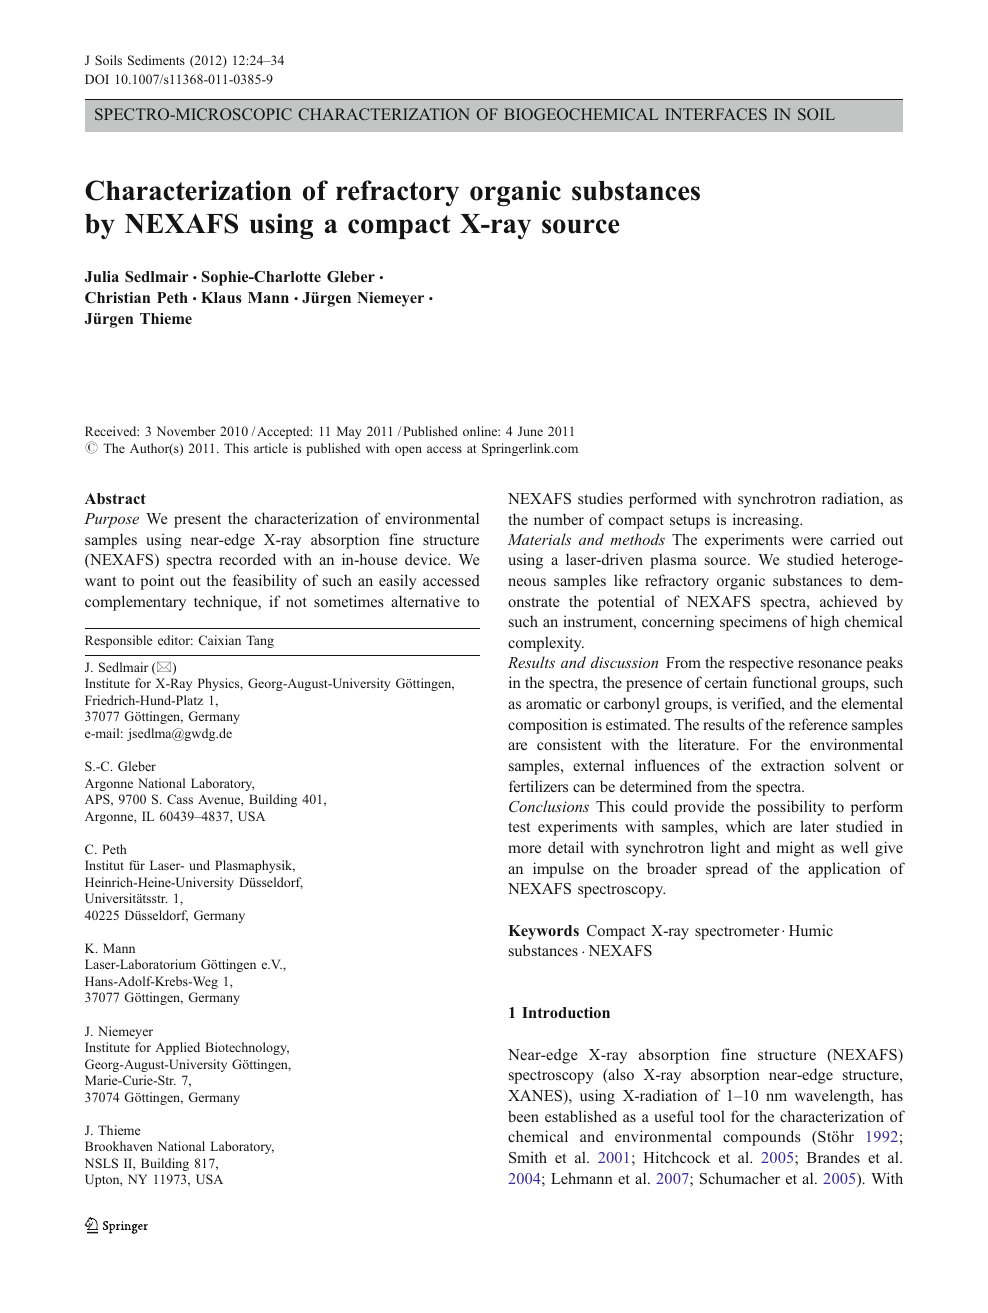 Characterization Of Refractory Organic Substances By Nexafs Using A Compact X Ray Source Topic Of Research Paper In Chemical Sciences Download Scholarly Article Pdf And Read For Free On Cyberleninka Open Science